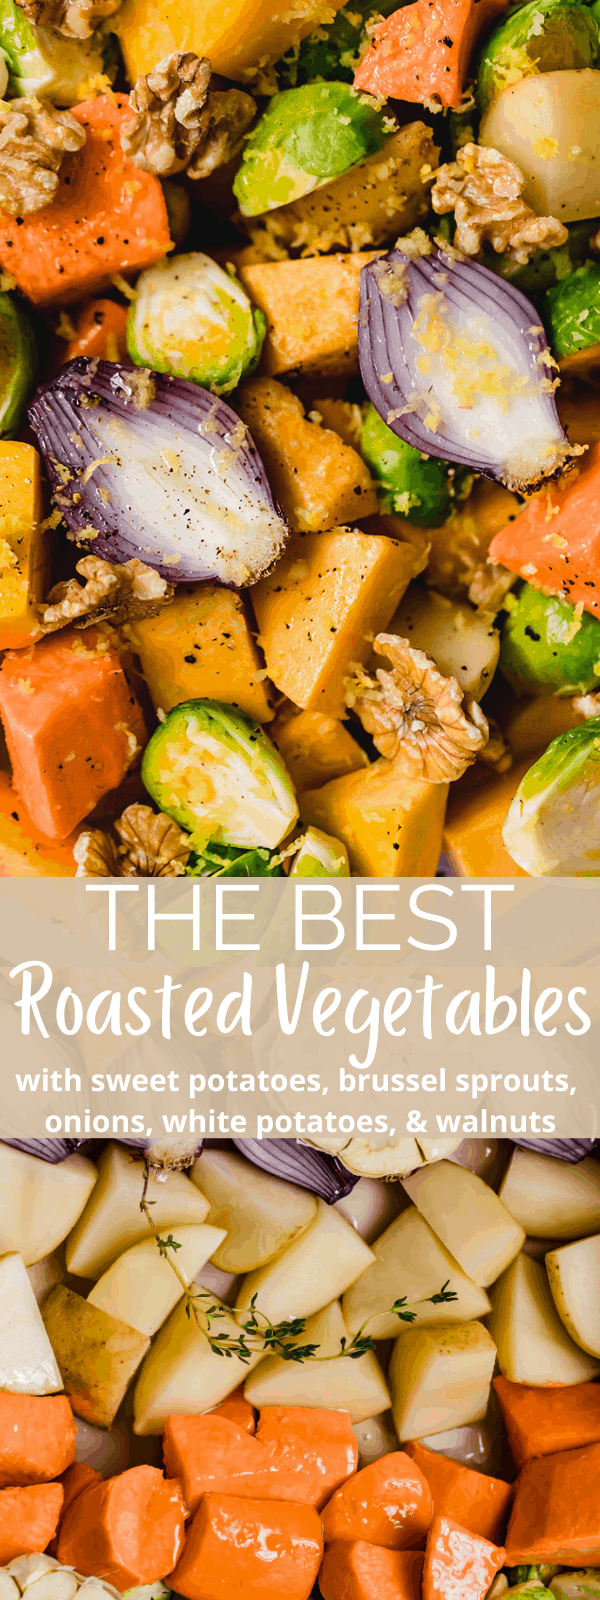 The Best Roasted Vegetables Recipe | Easy Weeknight Recipes